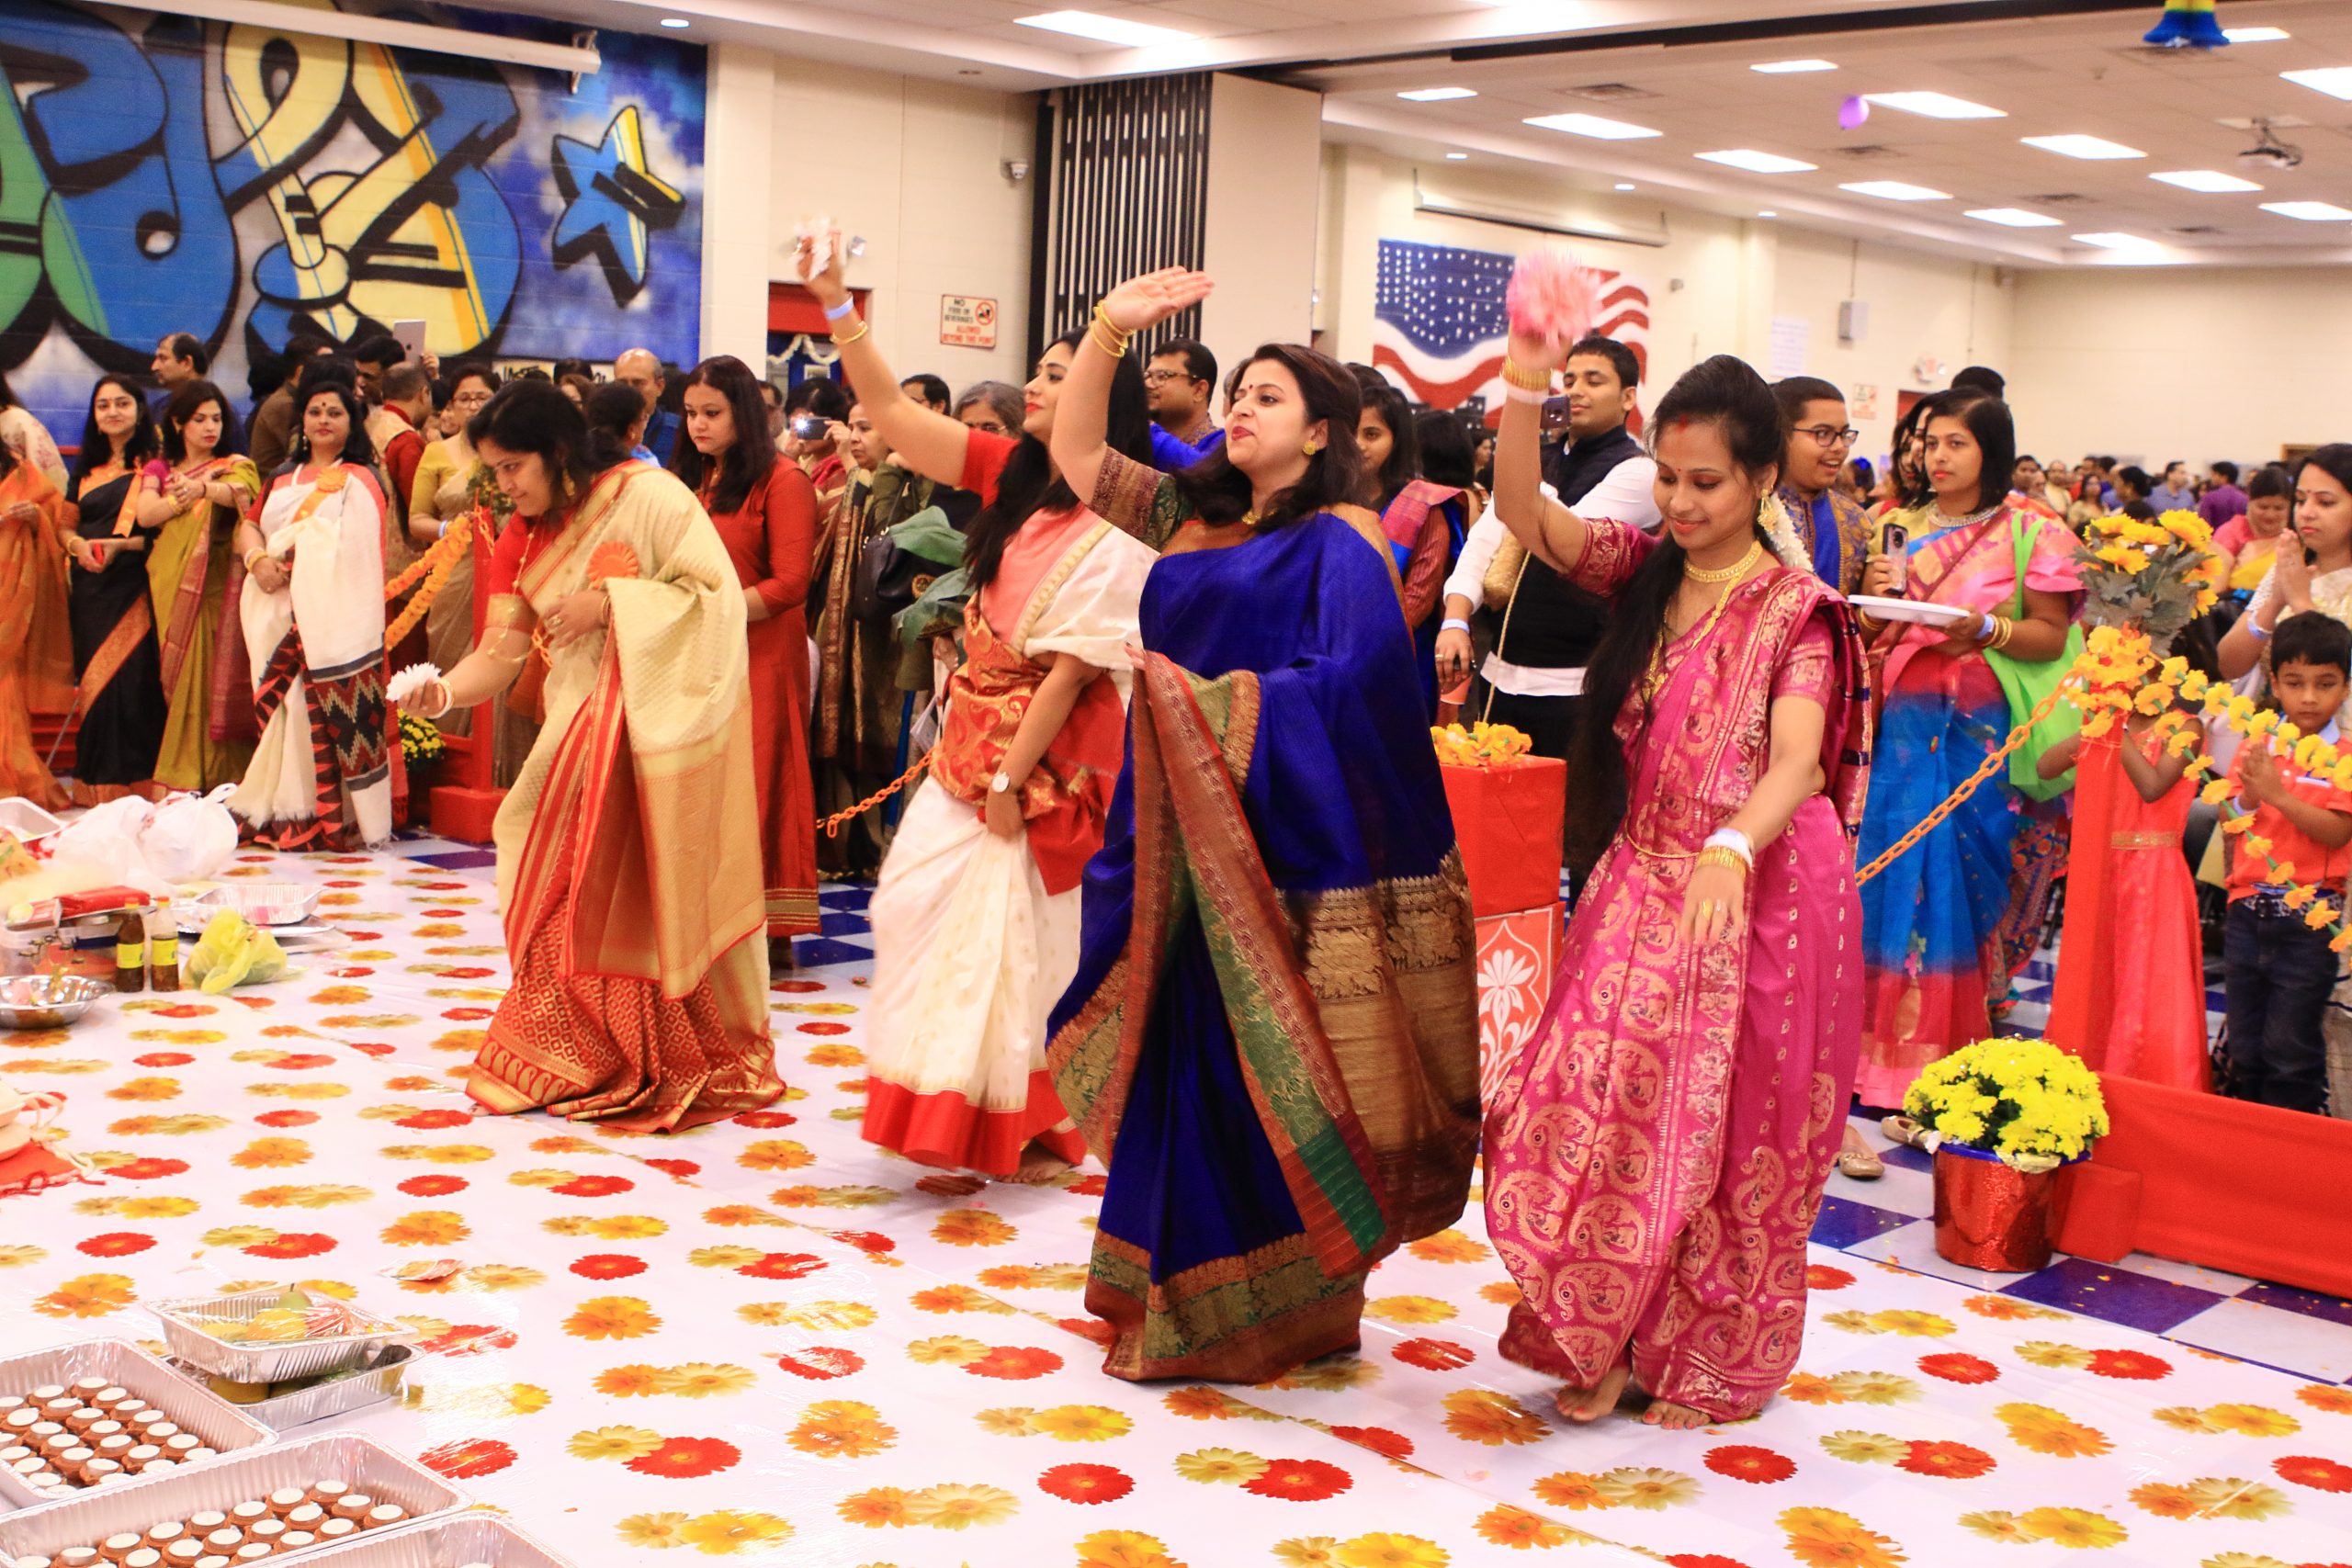 Promote Indian social, cultural and religious events throughout the year